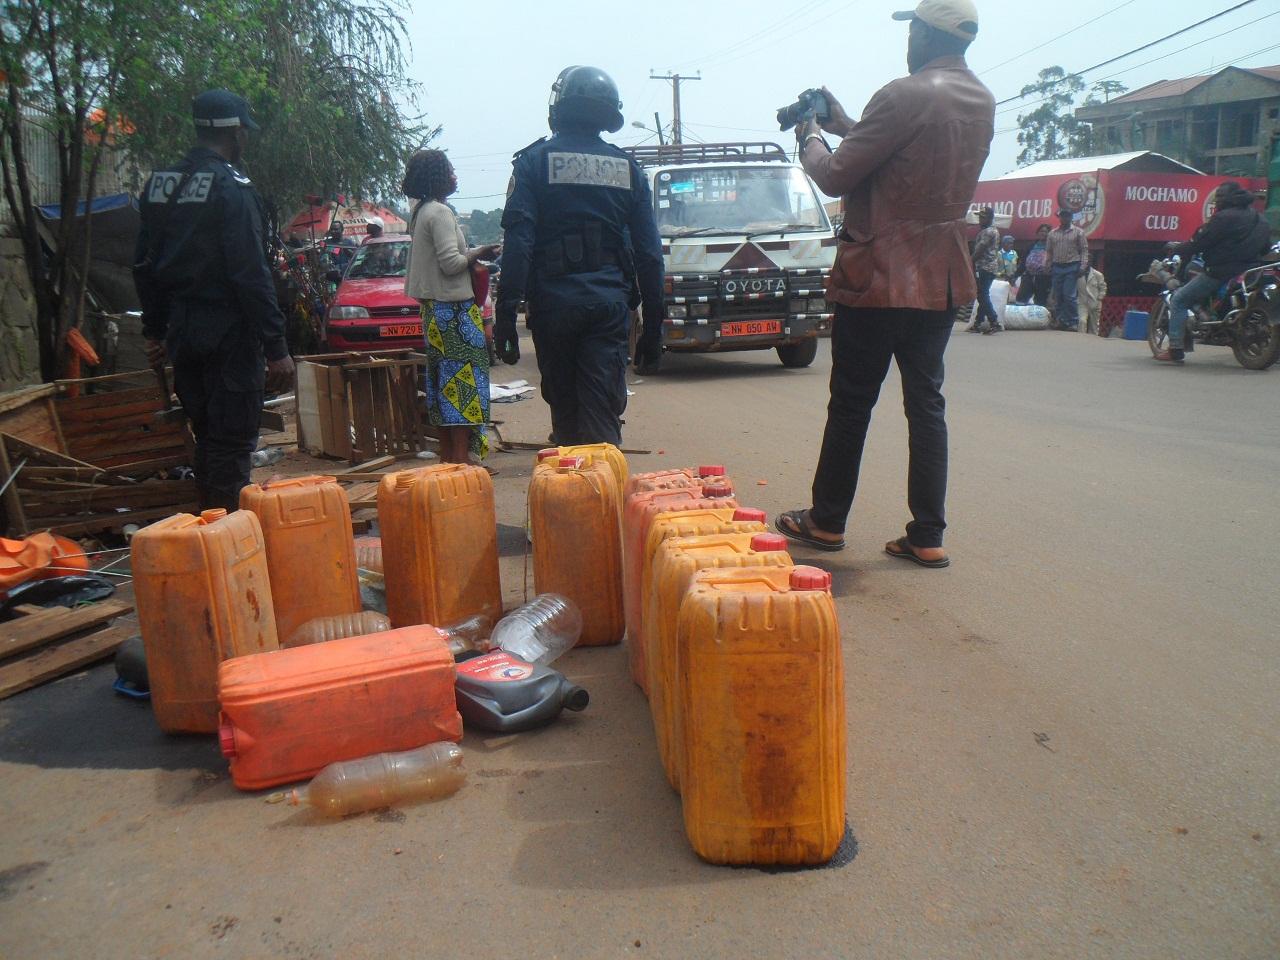 Fuel being sold on the streets of Bamenda, Cameroon. Credit: Mbom Sixtus.